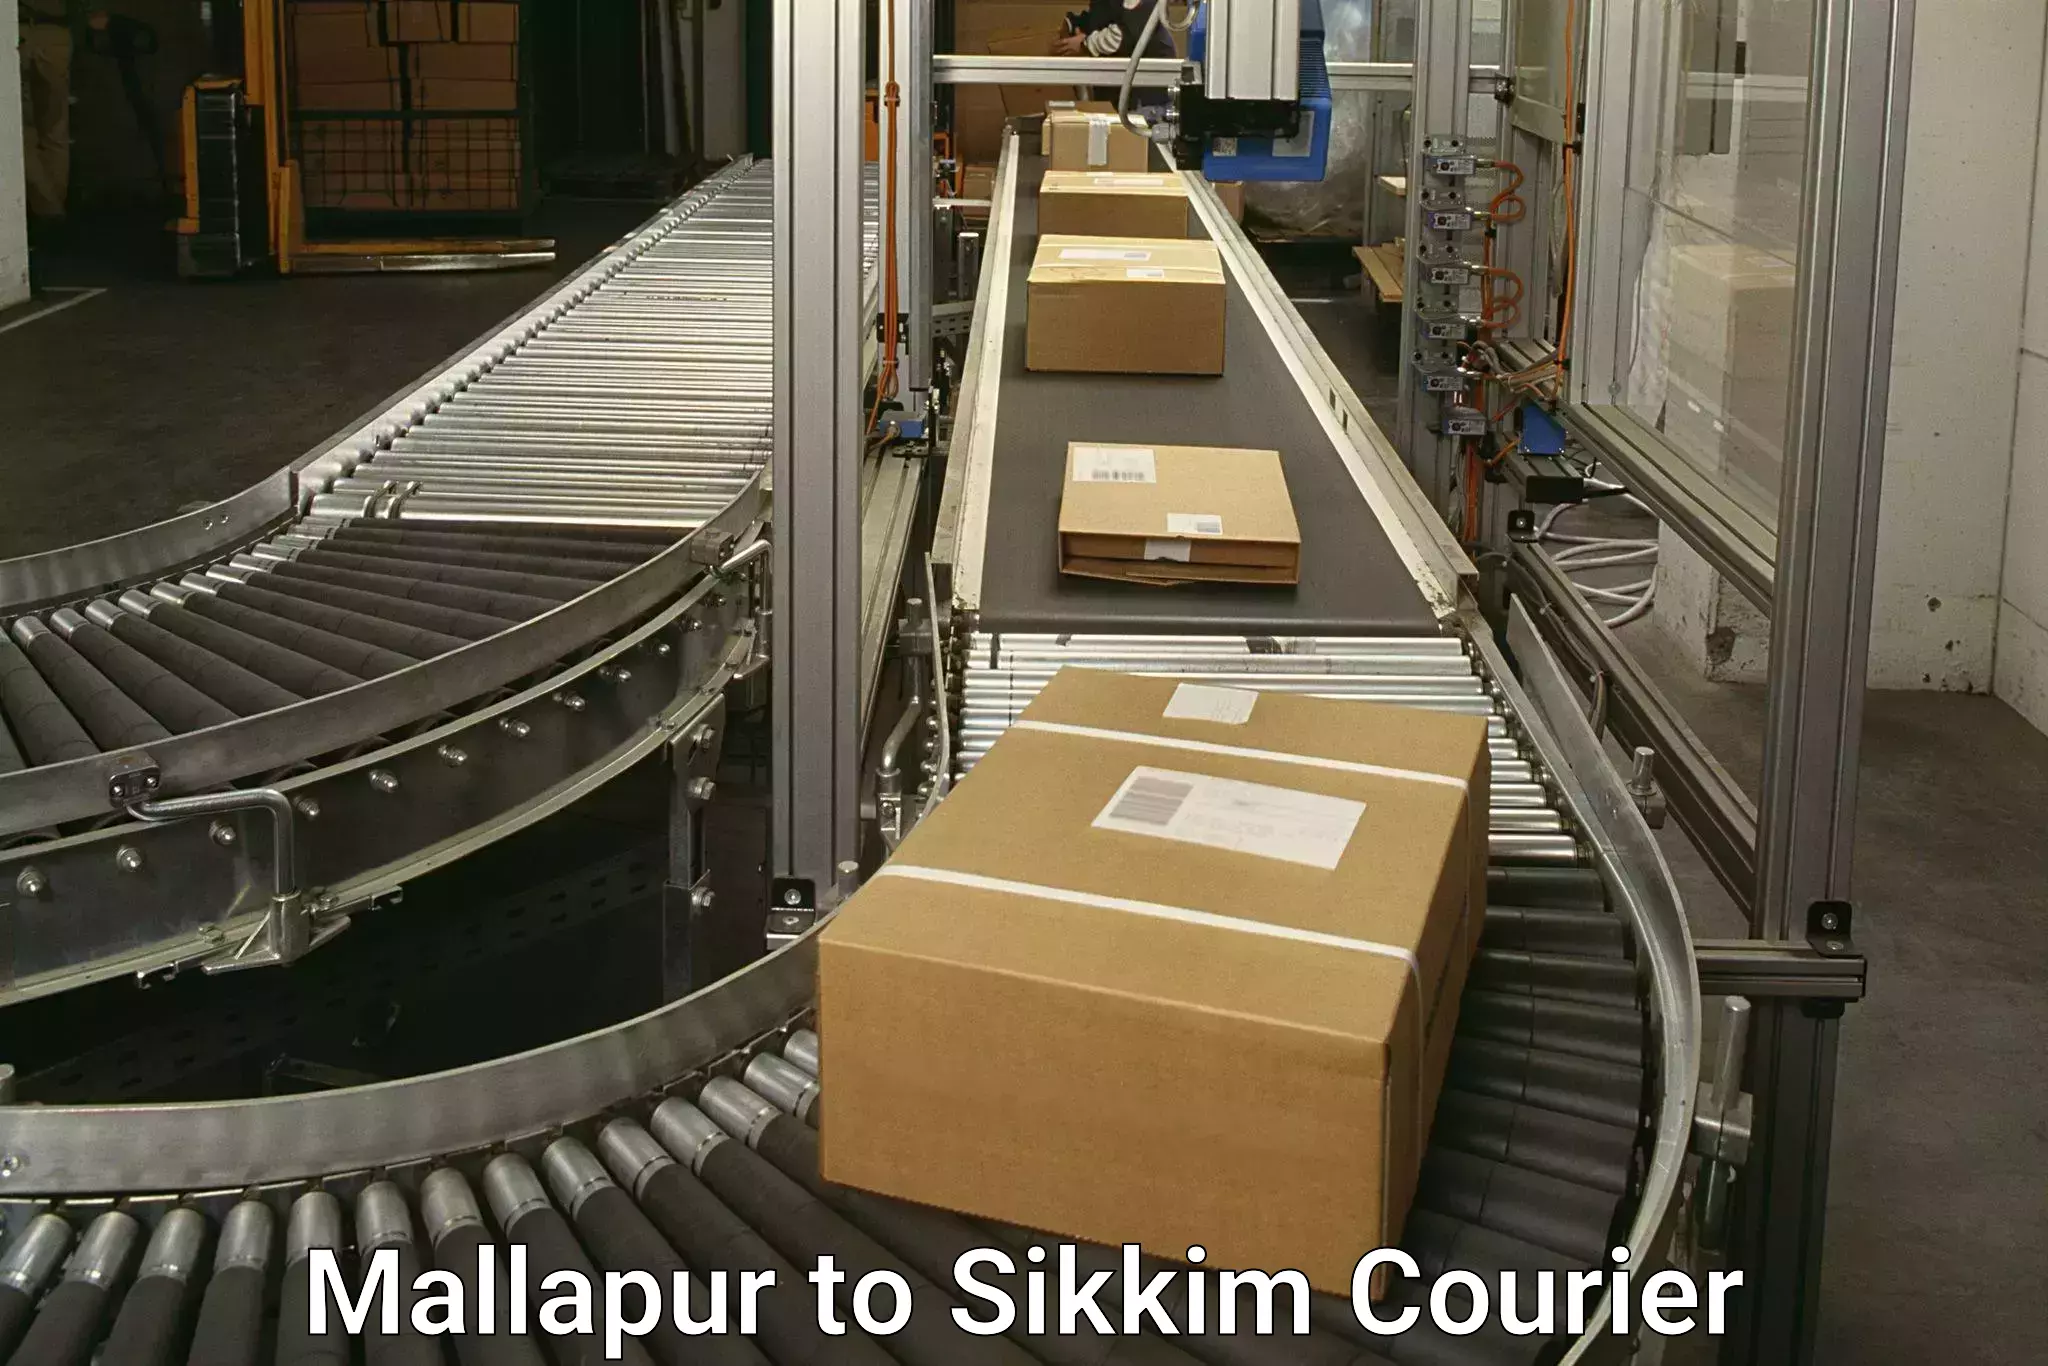 Nationwide delivery network Mallapur to Sikkim